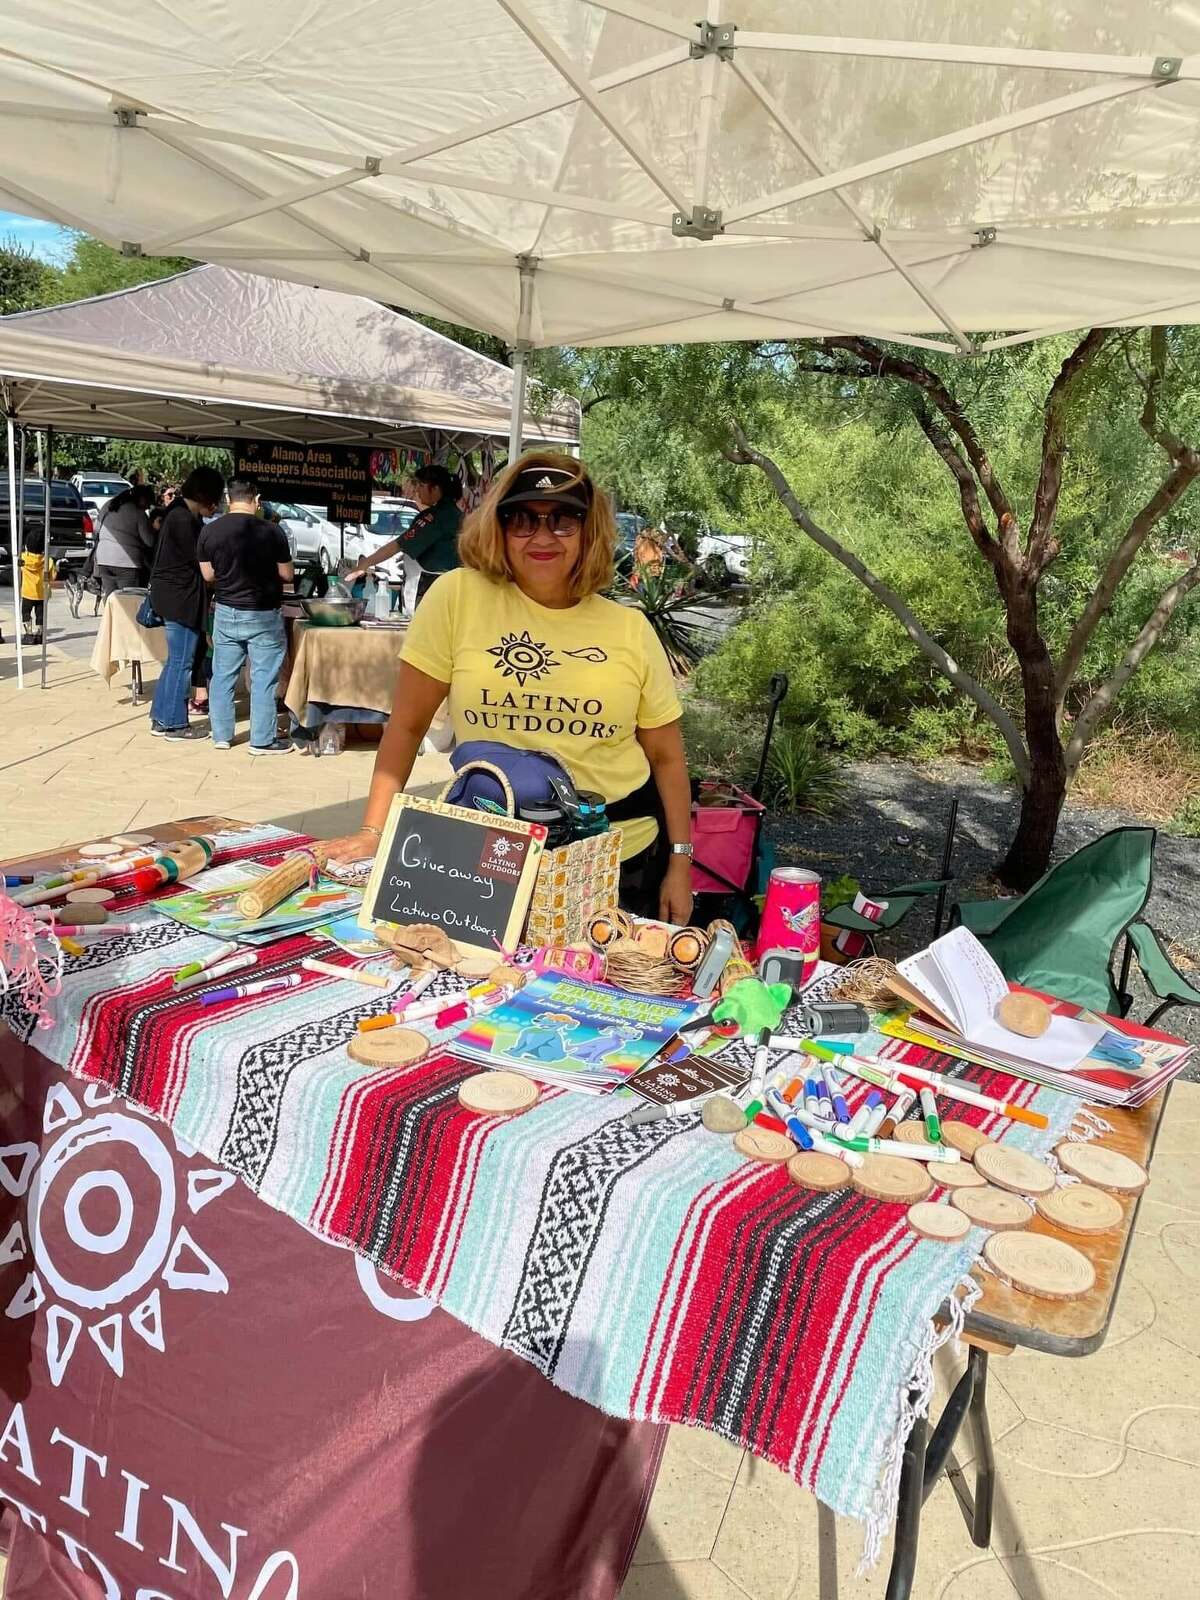 Latino Outdoors set up a booth at the Monarch and Pollinator Festival spread throughout Confluence Park.